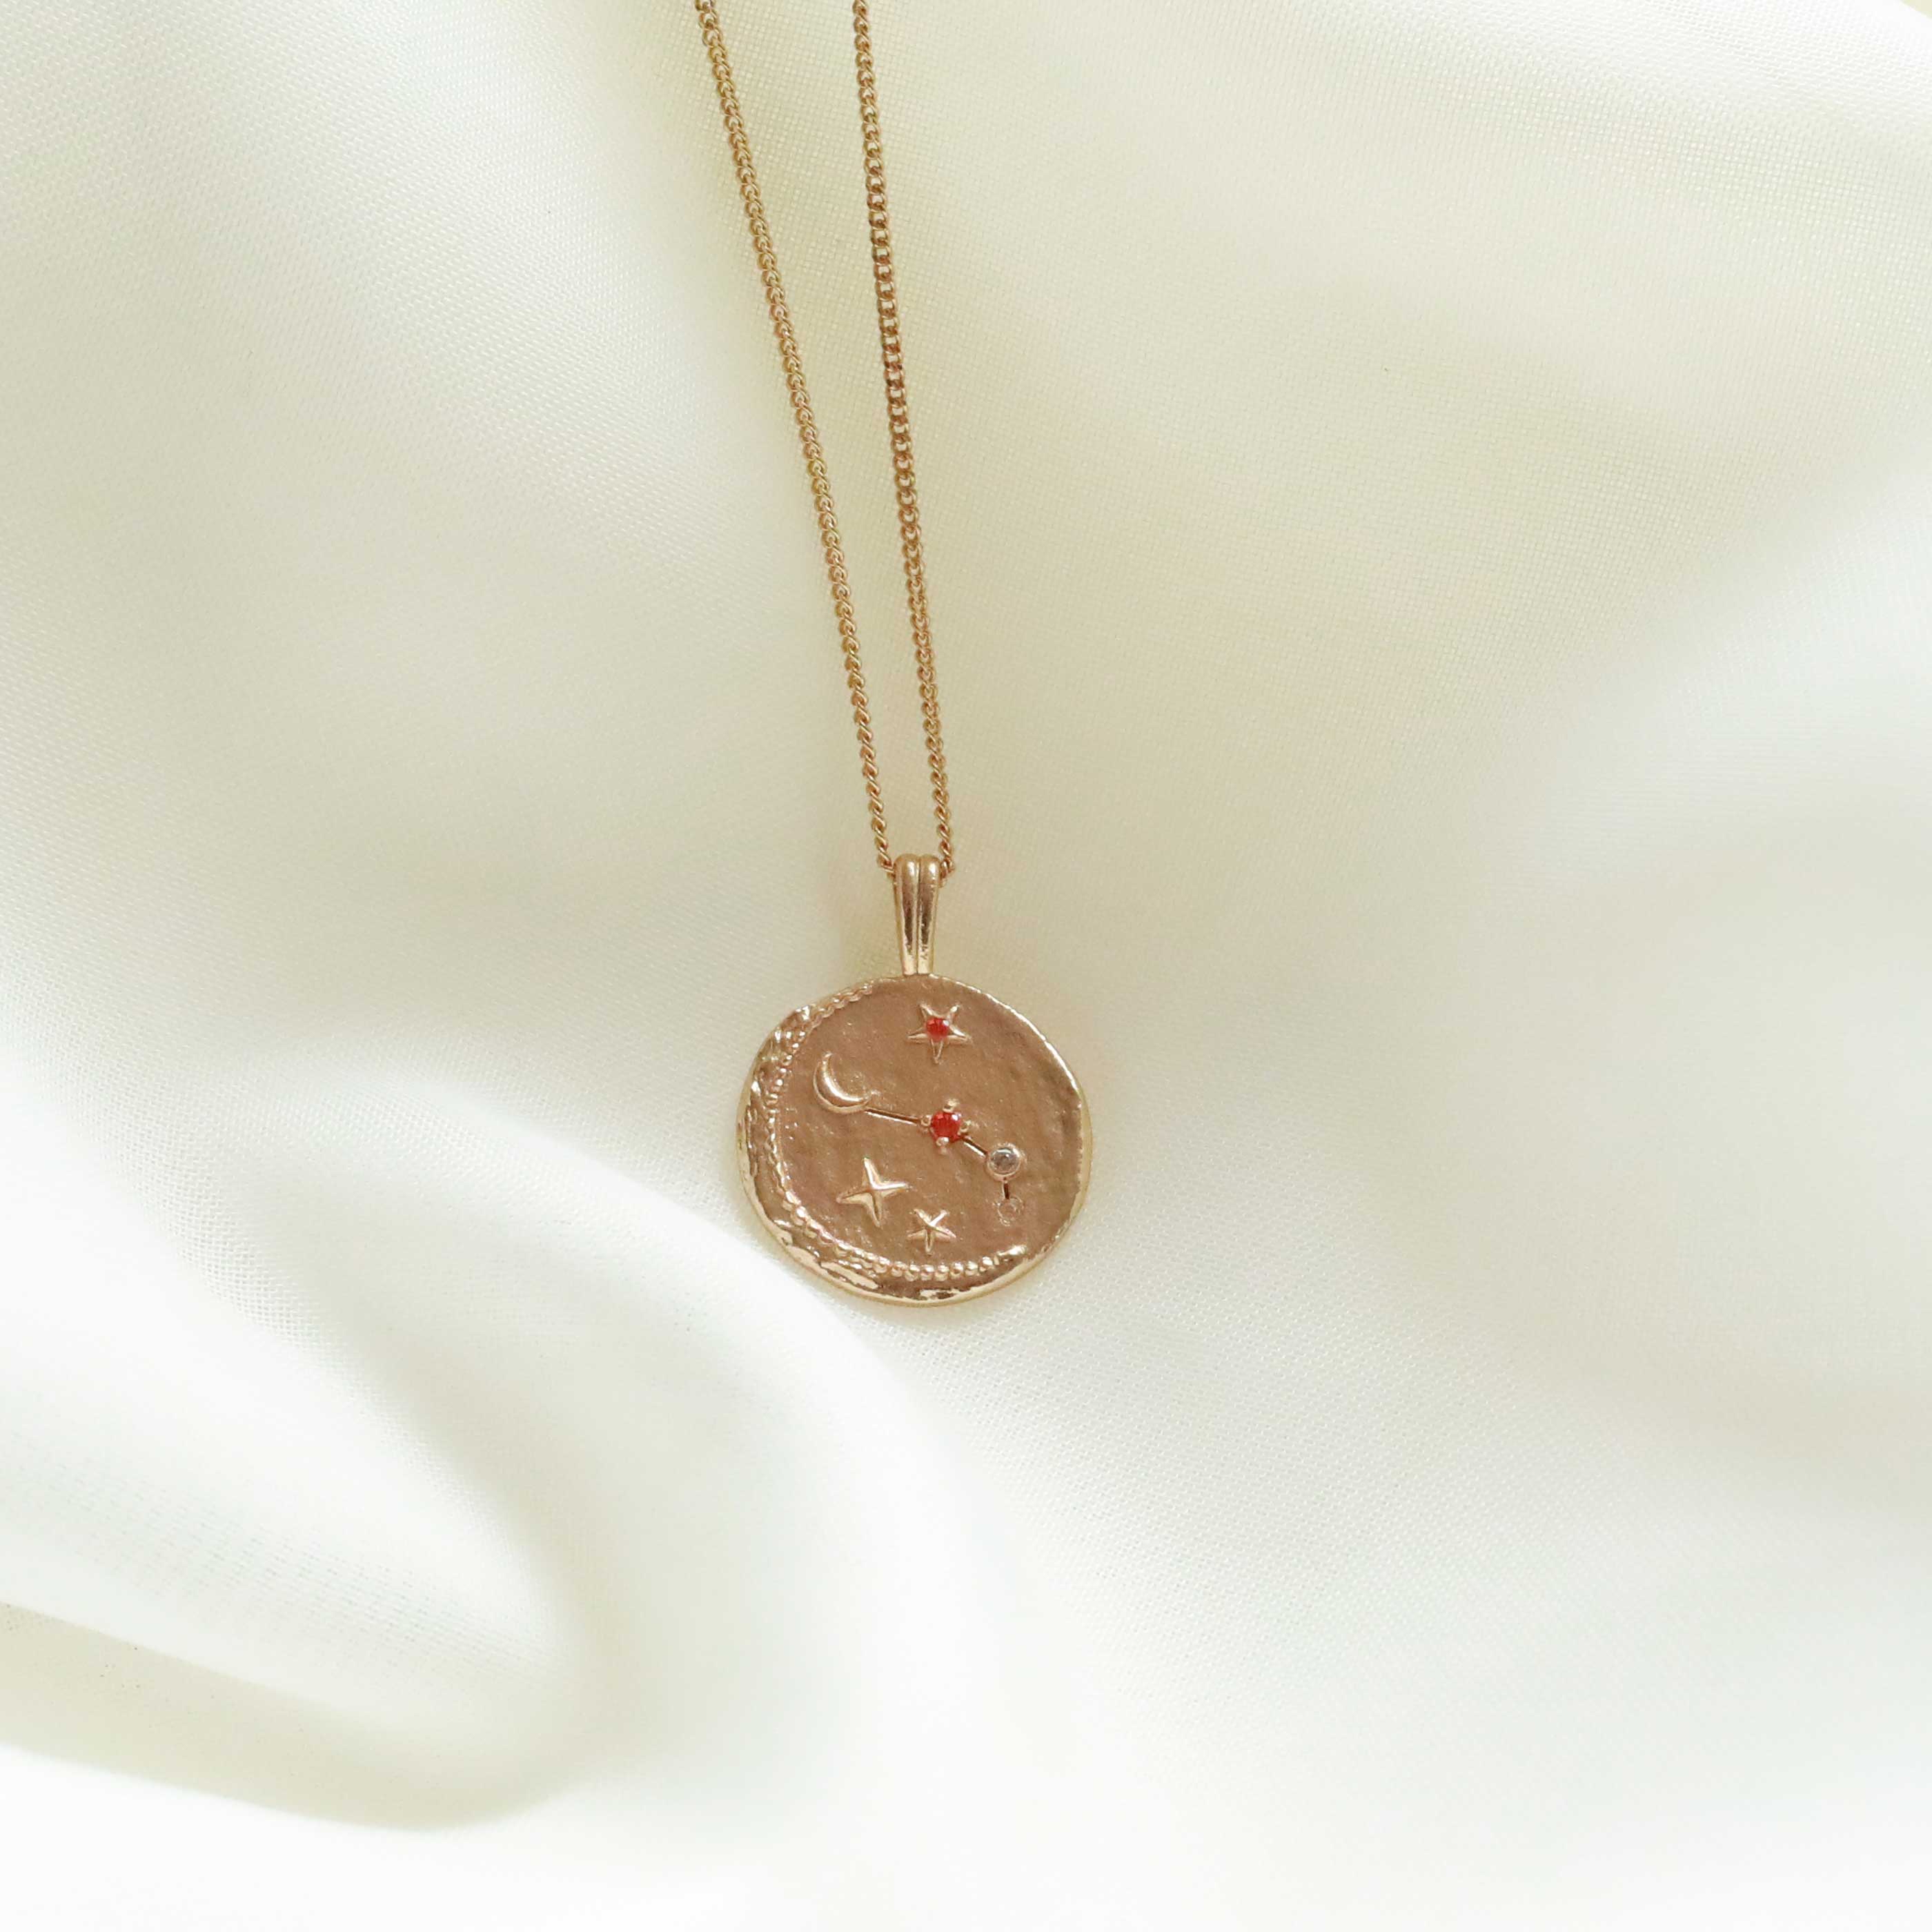 Aries Zodiac Pendant Necklace in Gold